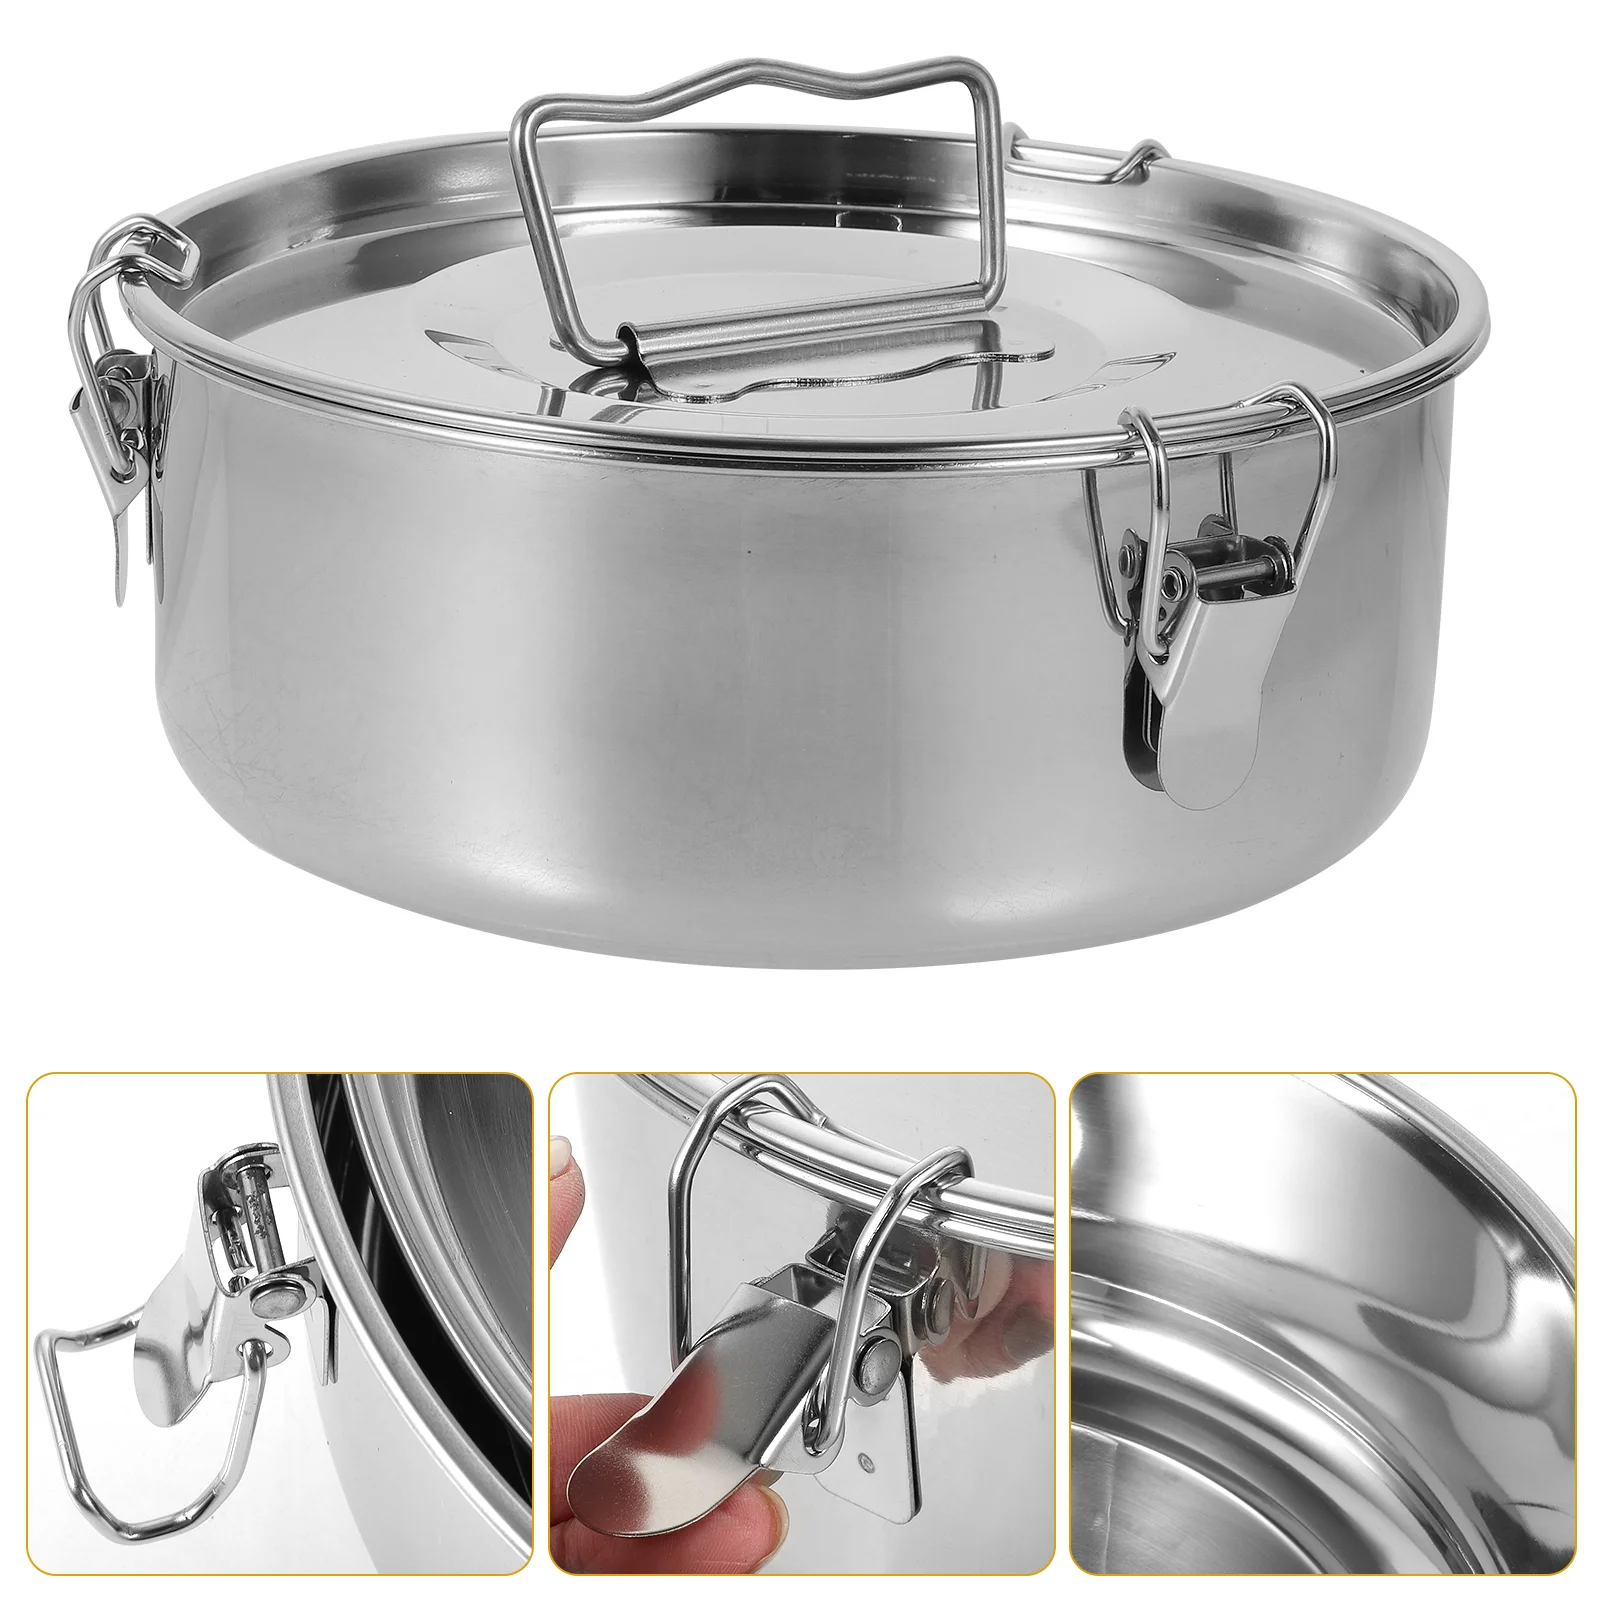 

Molds Flan Baking Flanera Stainless Bread Jelly Pans Desserts Muffin Pie Pan Pudding Cheesecake Pastry Steel Cake Maker Pots